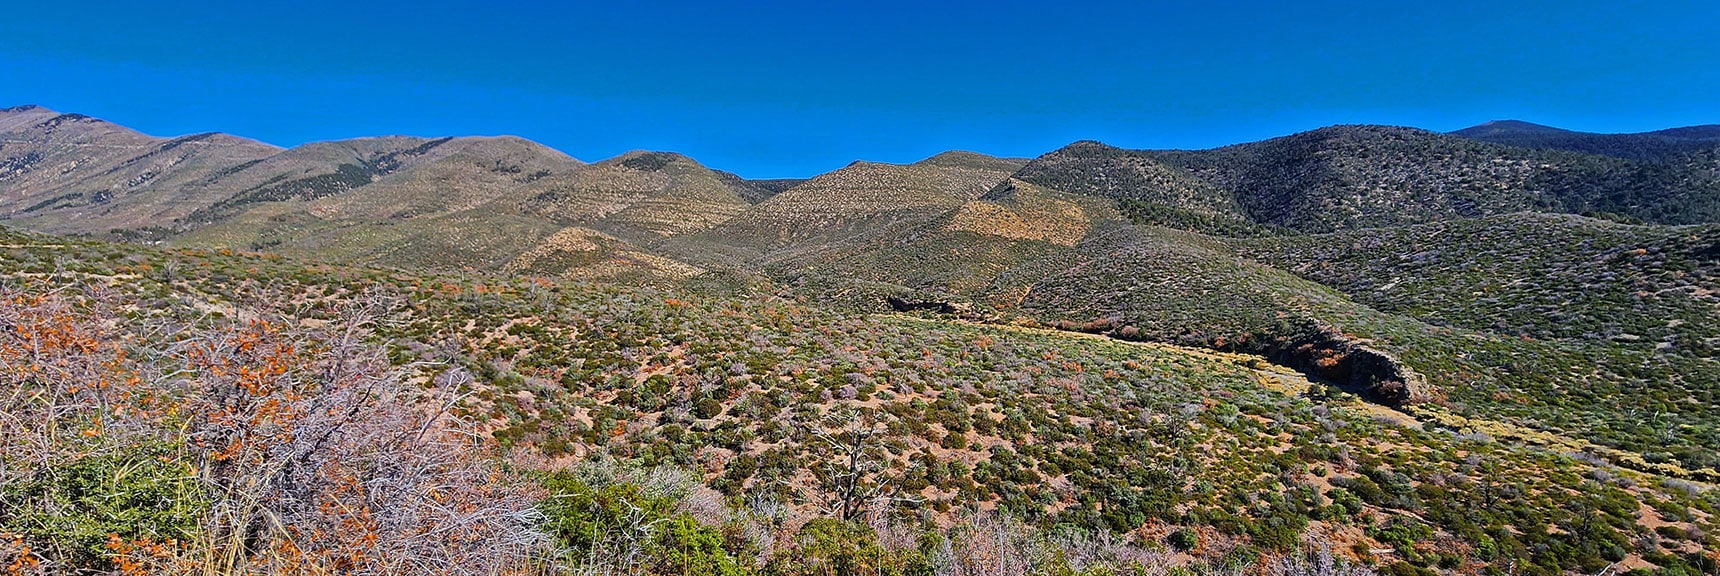 View East Across Lovell Canyon. | Schaefer Springs Loop Trail | Lovell Canyon, Nevada